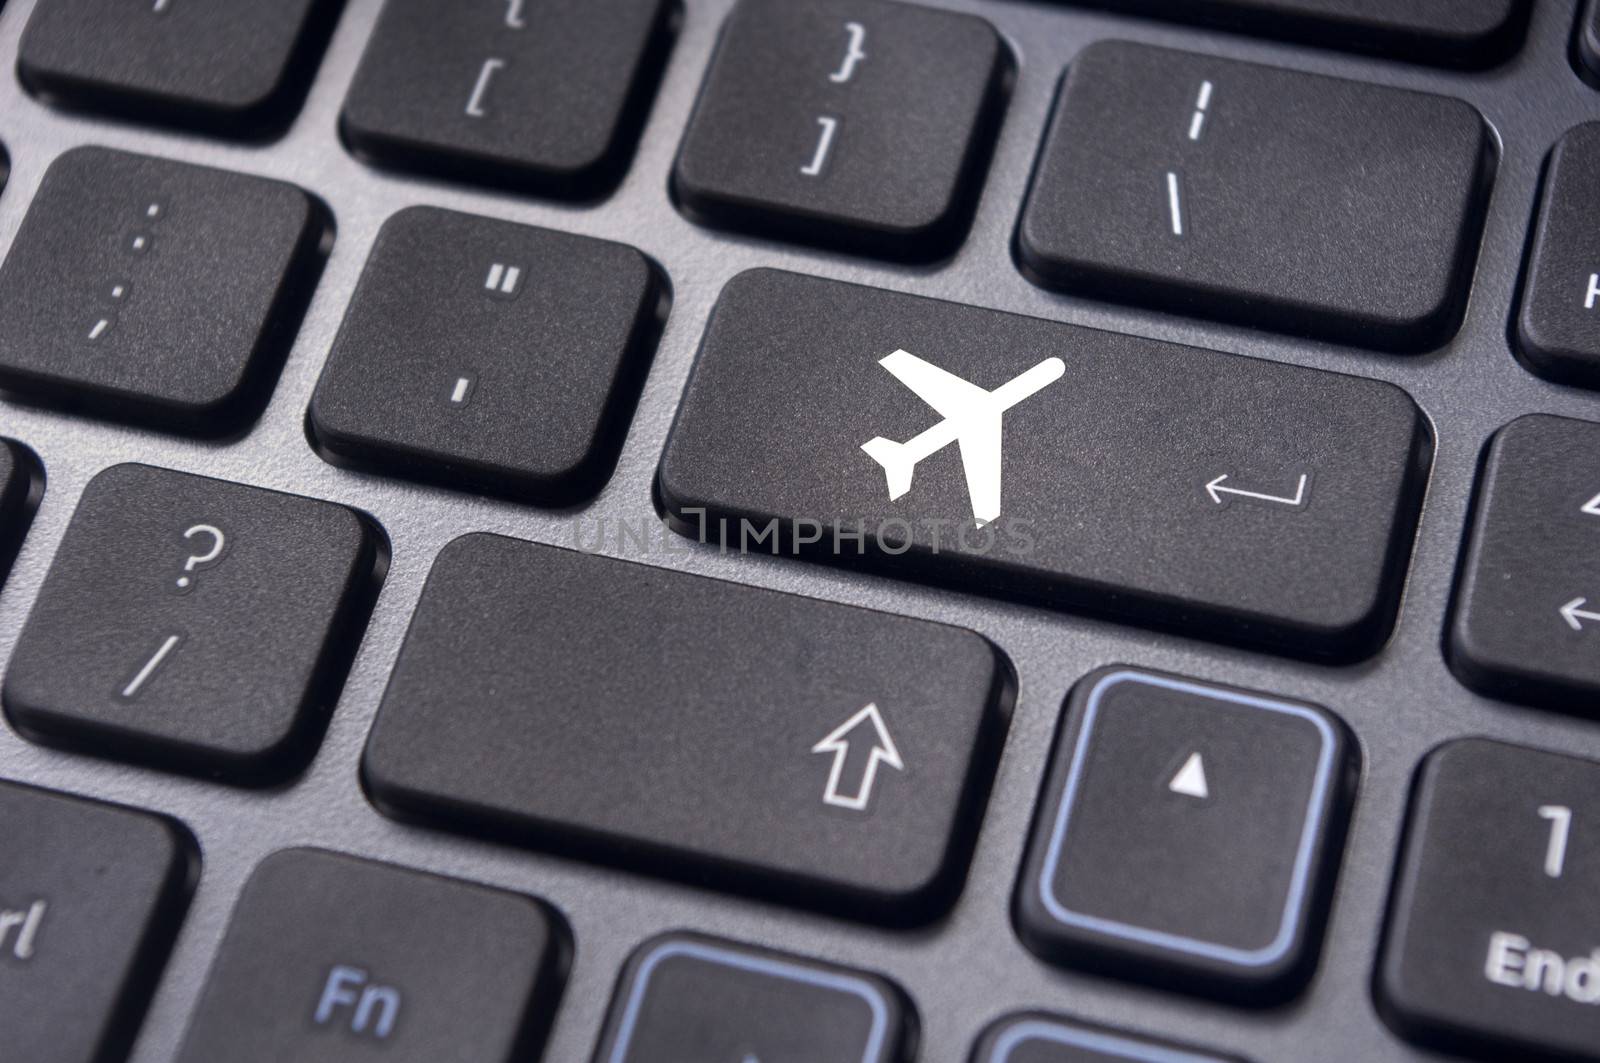 a plane sign on keyboard, to illustrate online booking or purchase of plane ticket or business travel concepts.